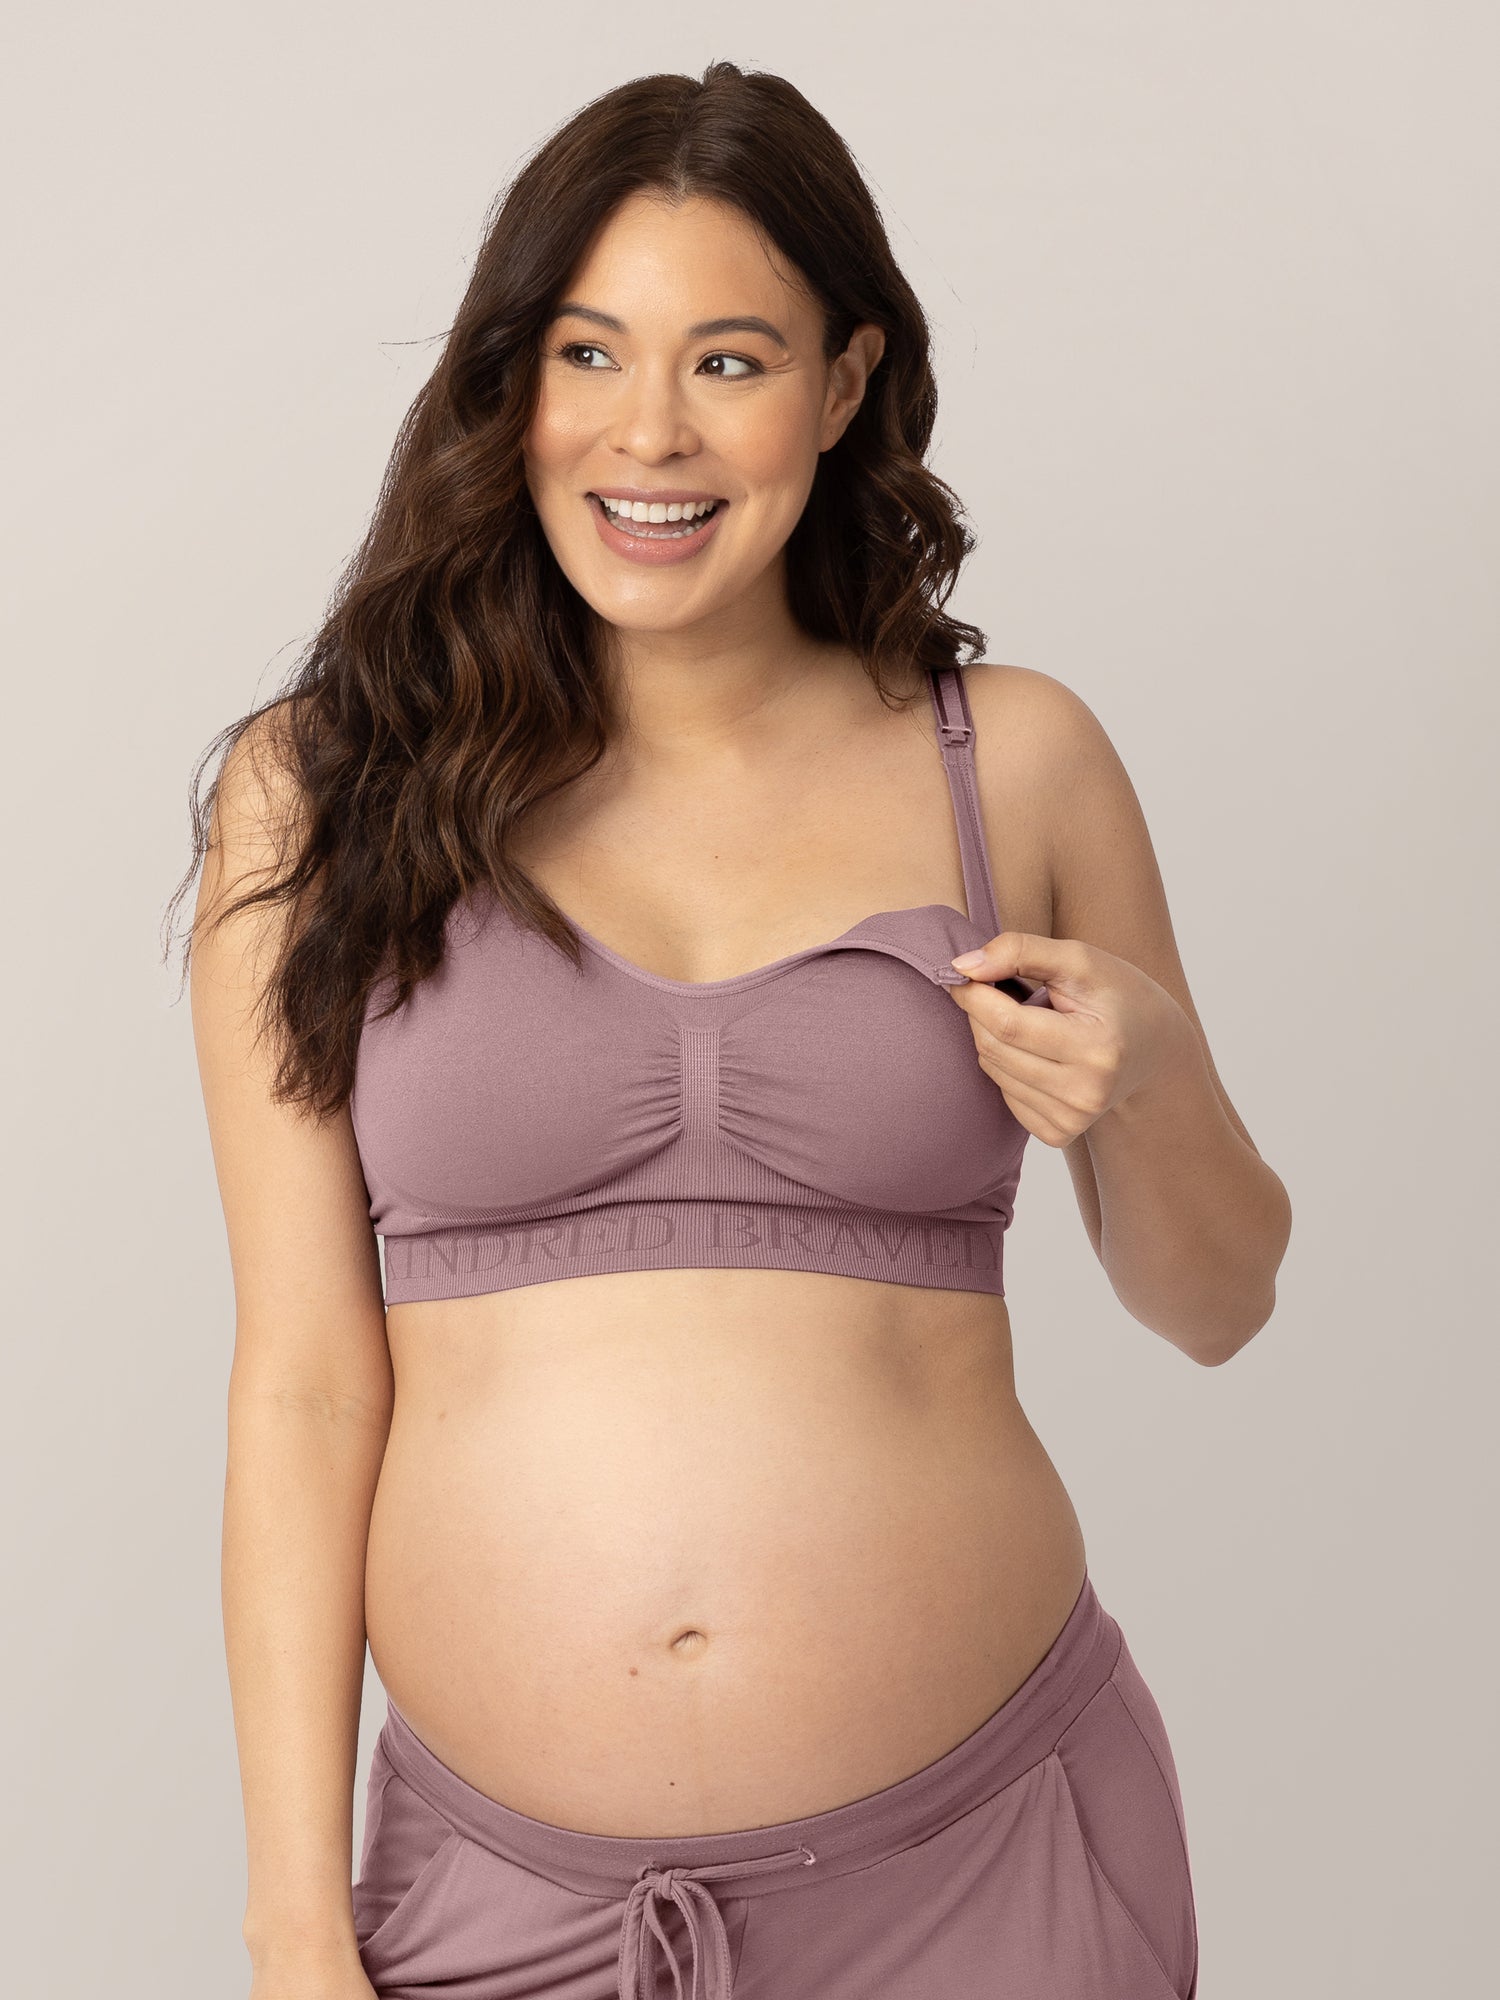 Pregnant model wearing the Simply Sublime Nursing Bra in Twilight